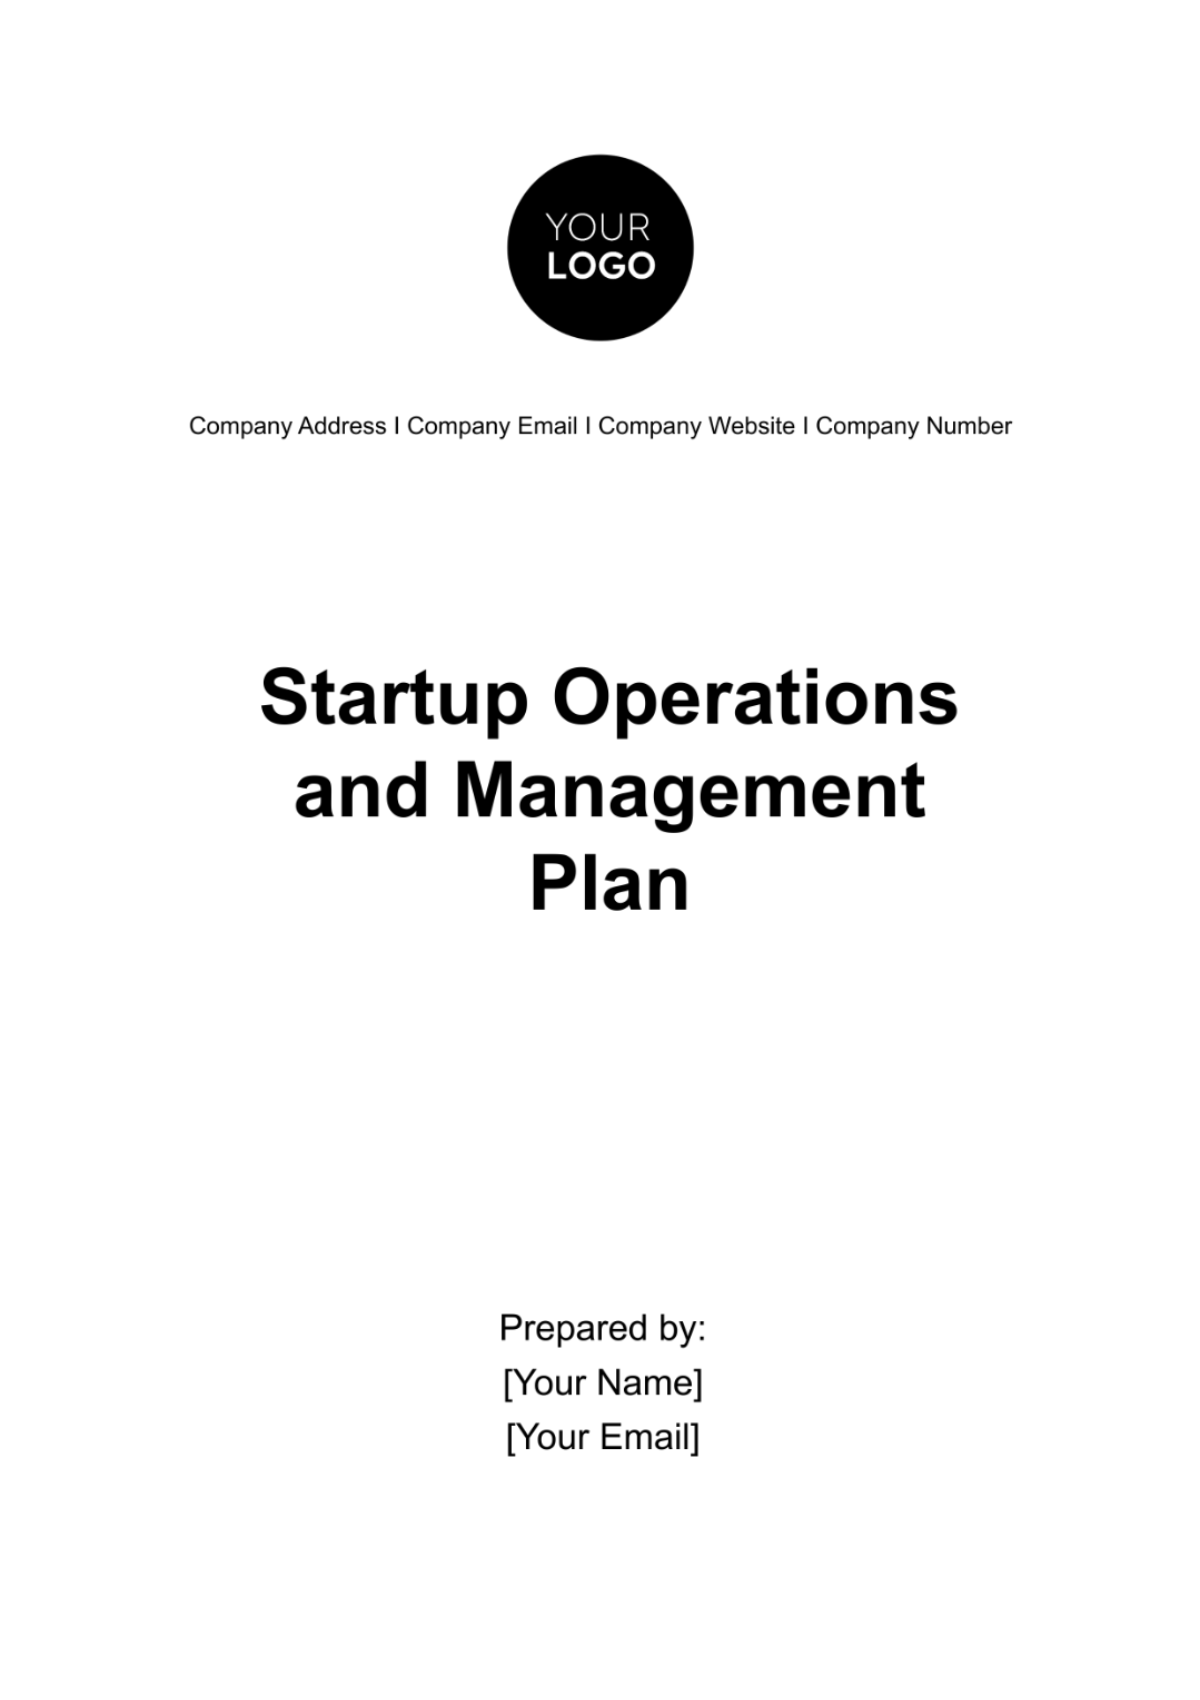 Startup Operations and Management Plan Template